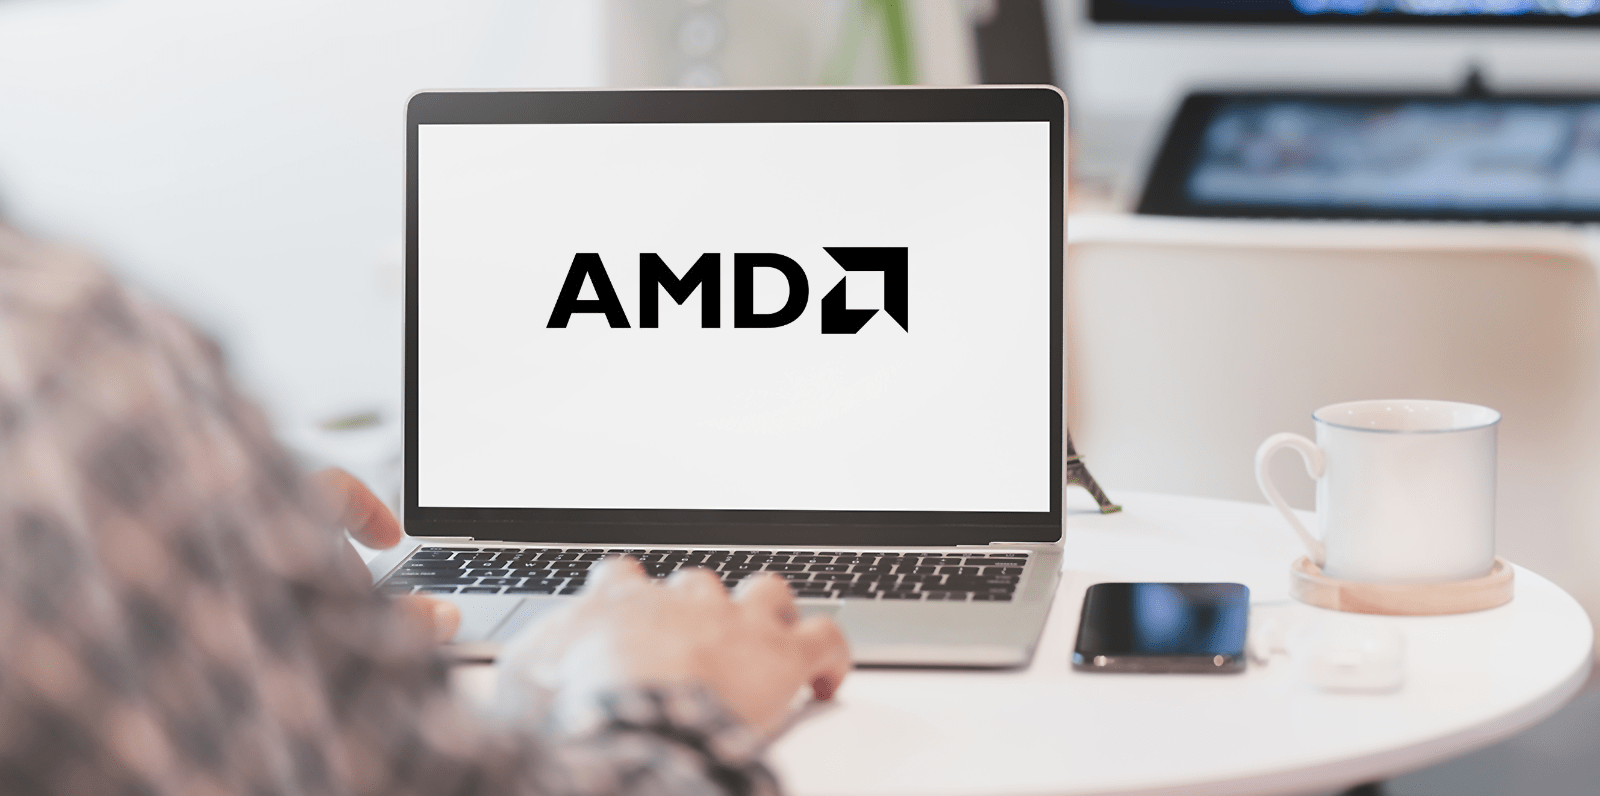 AMD Surpasses Goal to Deliver 25x Improvement in Mobile Processor Energy Efficiency